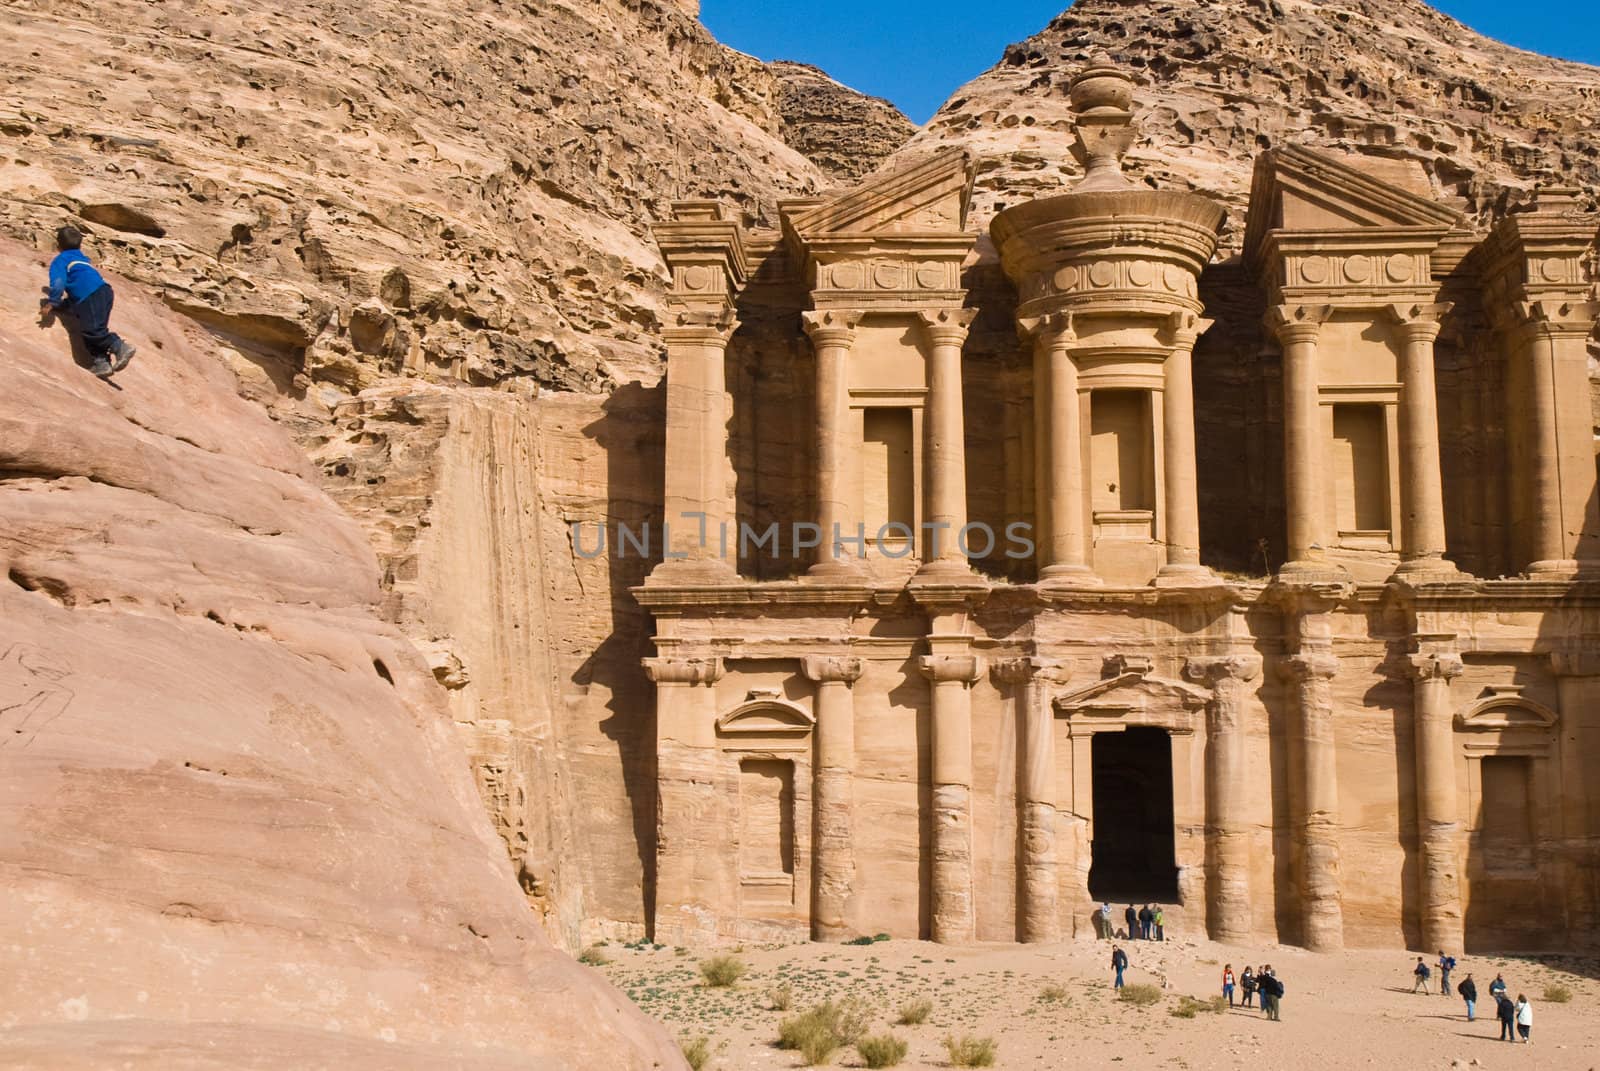 a picture of the monastry of Petra, Jordan.